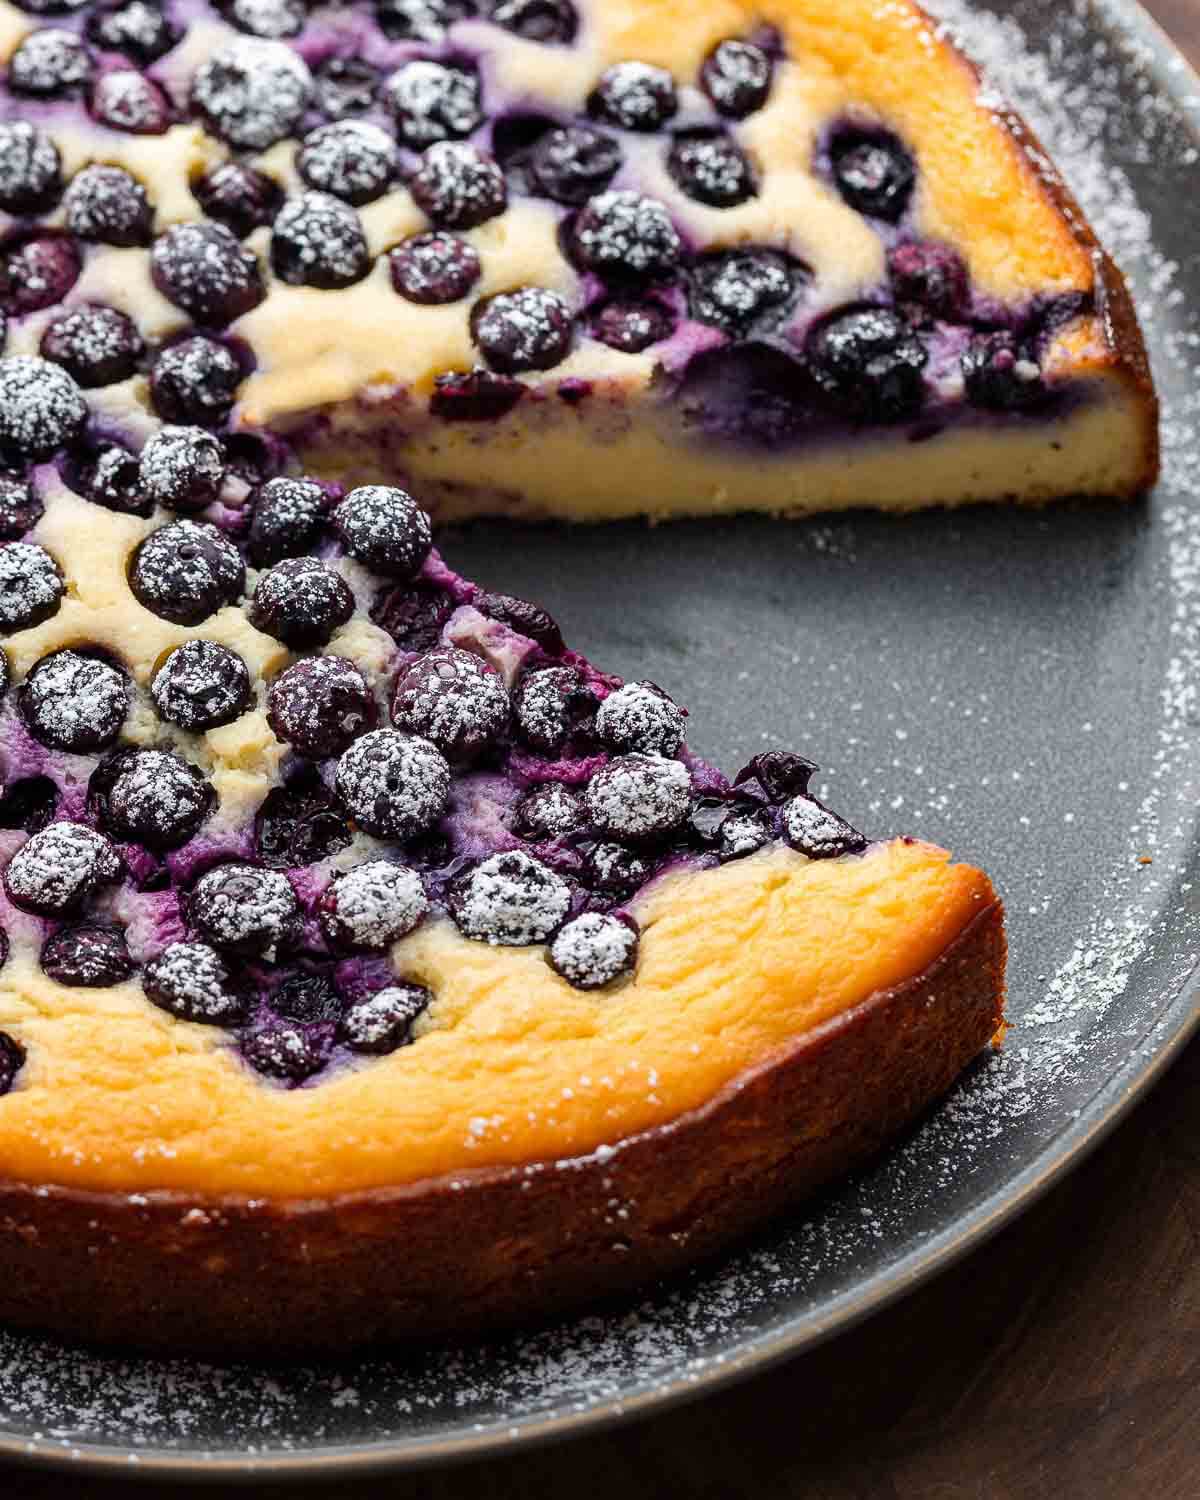 Blueberry ricotta cake on grey plate with 1 slice removed.